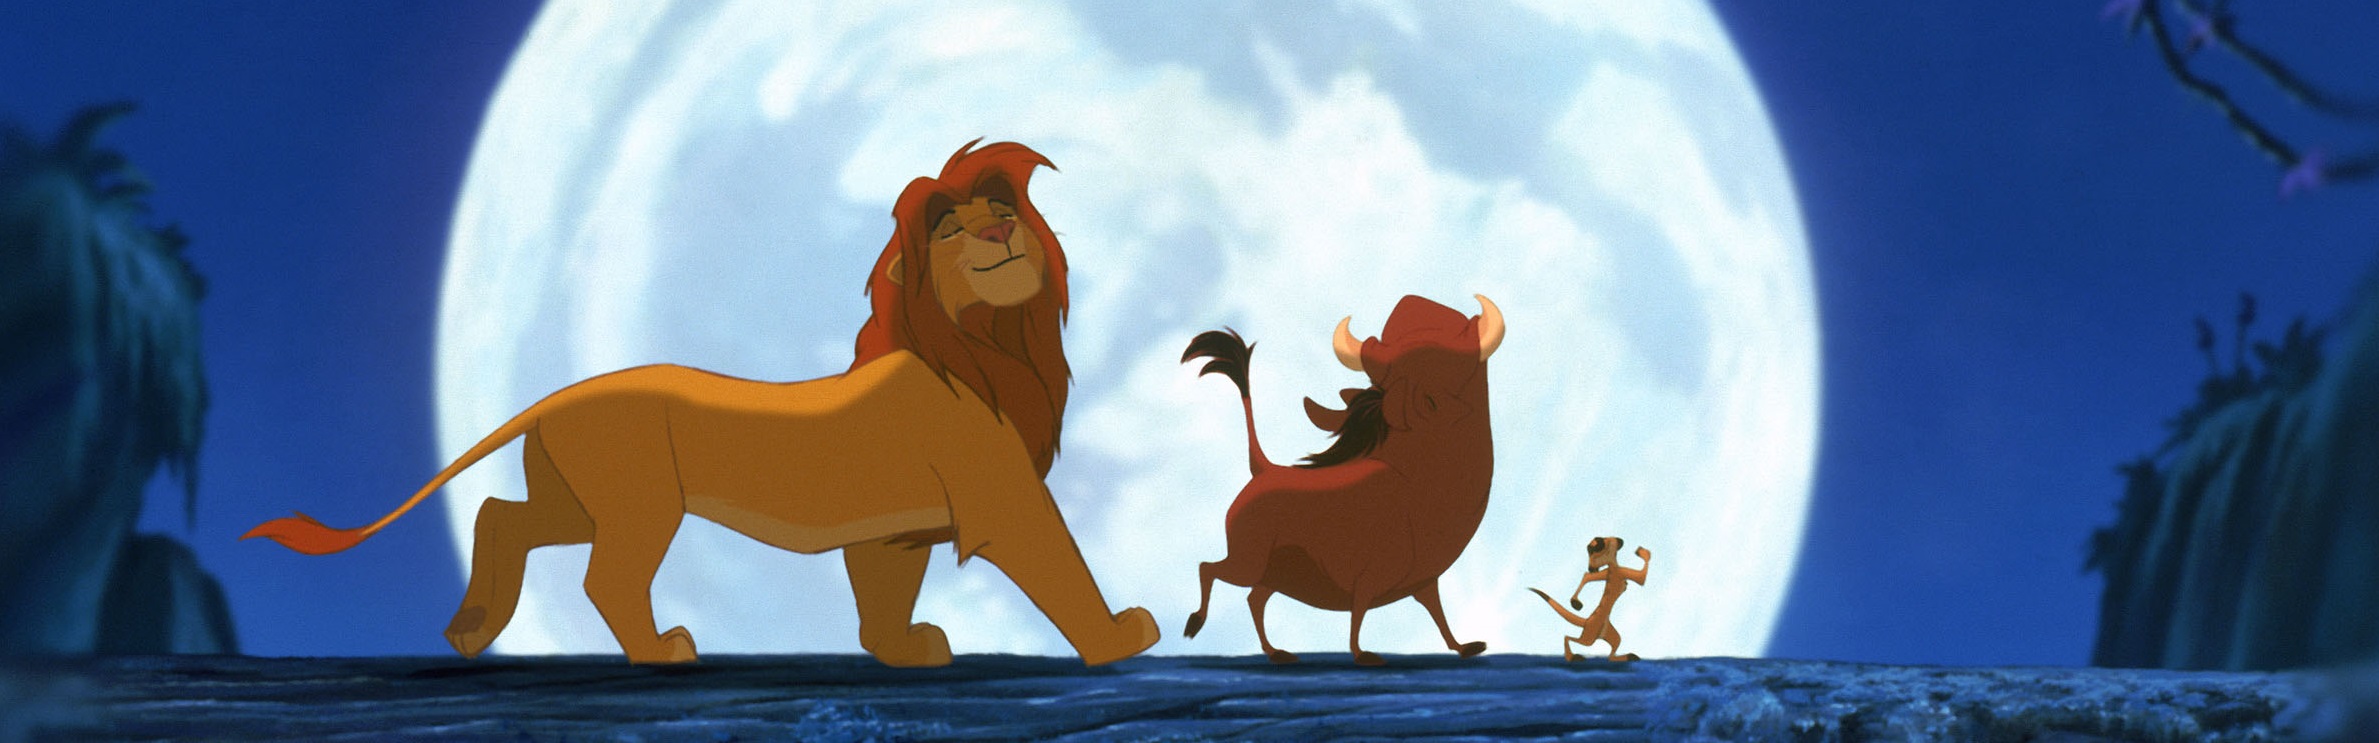 The Lion King (1994): The Movie Structure Archives - The Novel Smithy